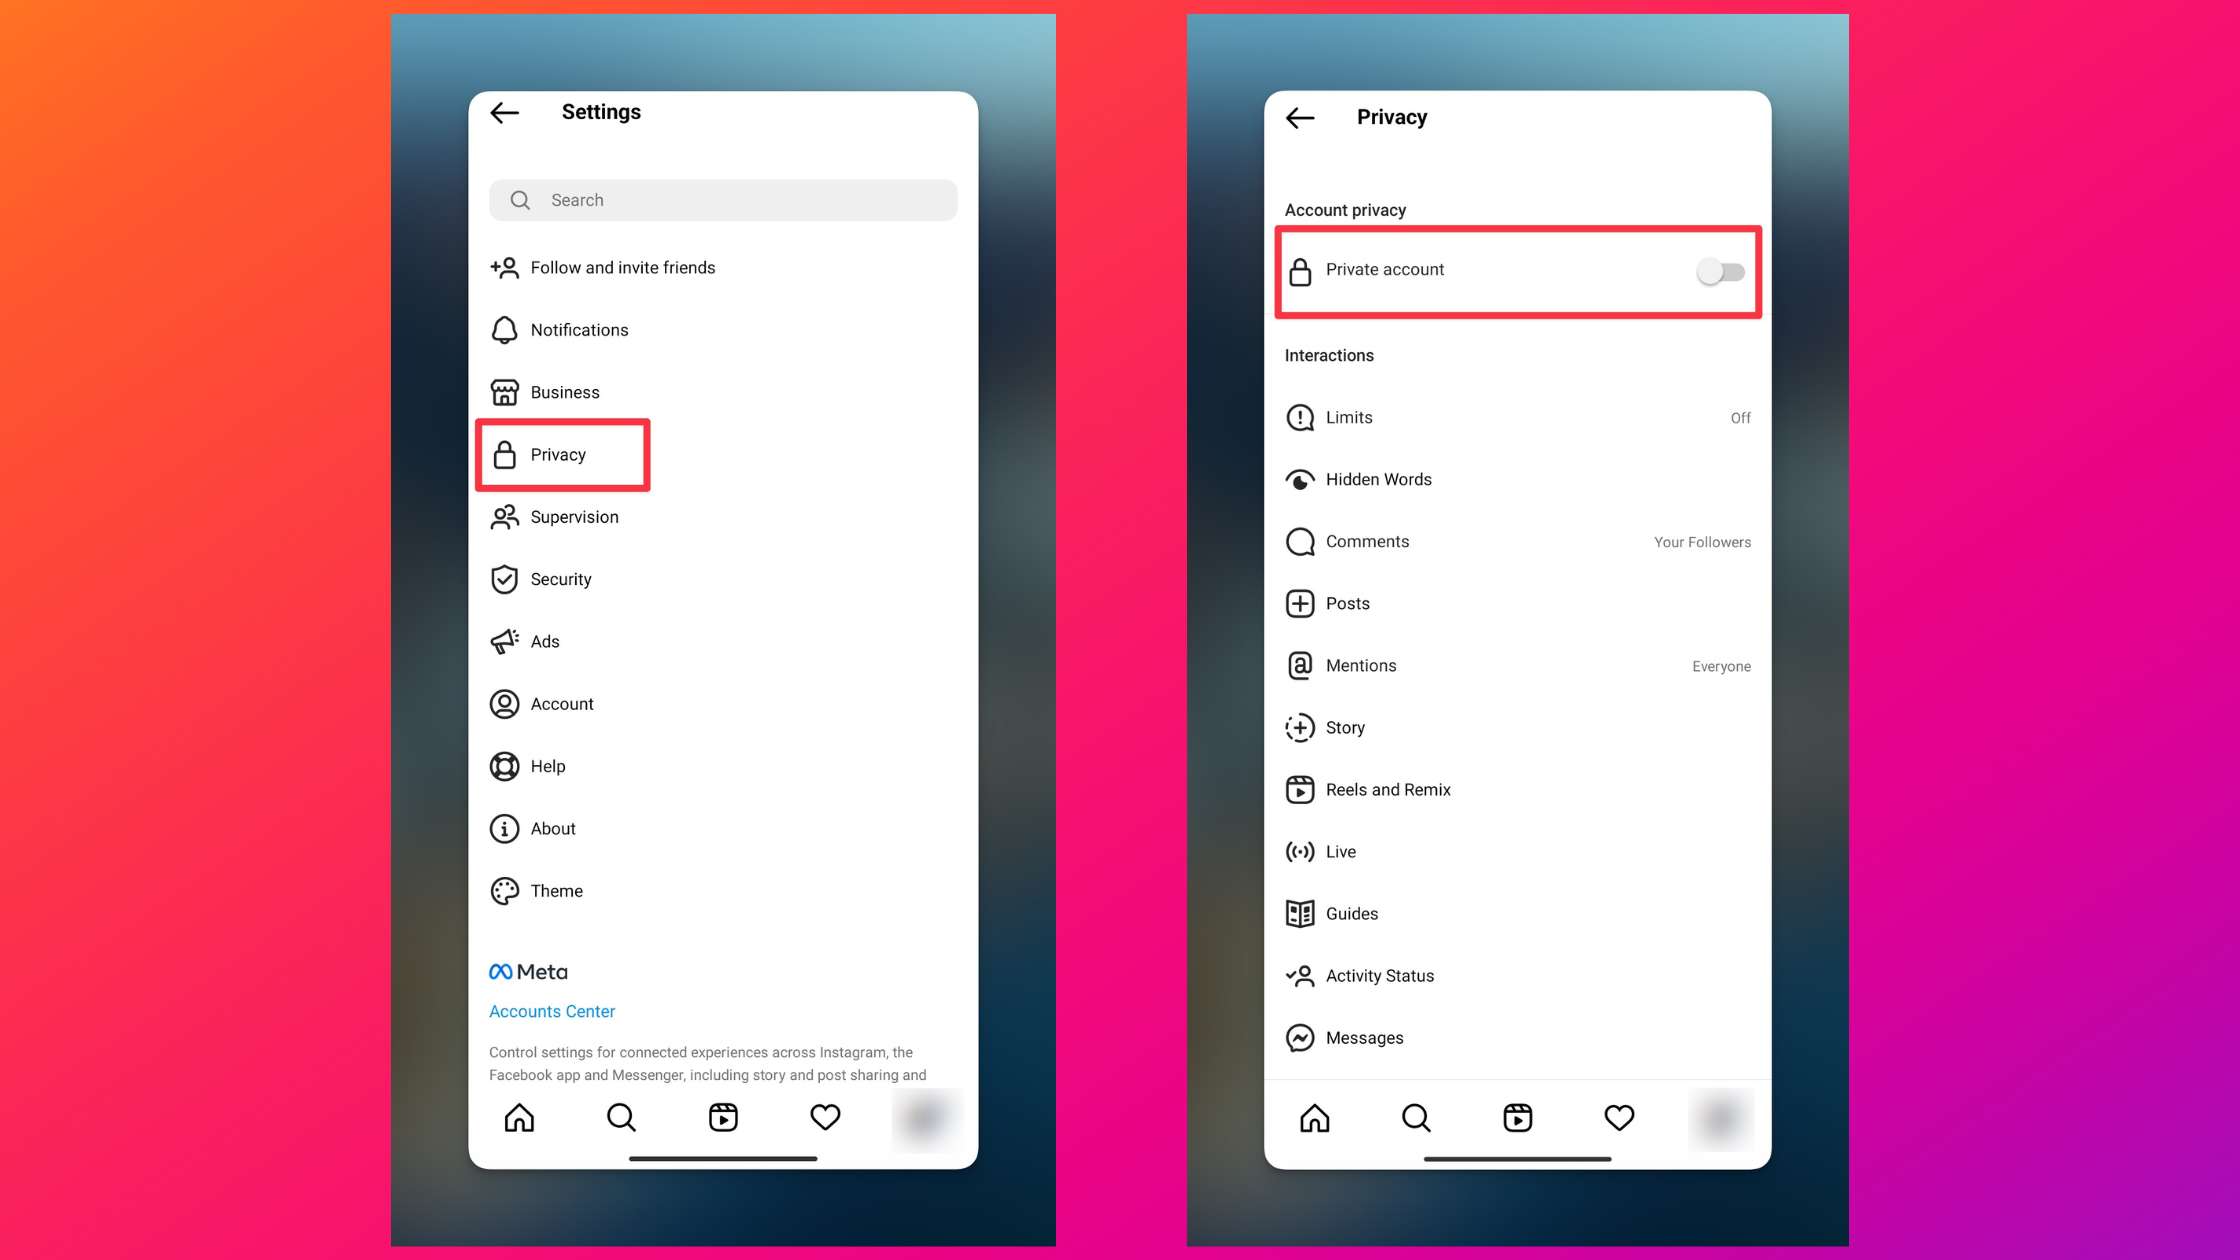 Remote.tools shows how to check if your account is private or not on Instagram app to add post to Instagram story